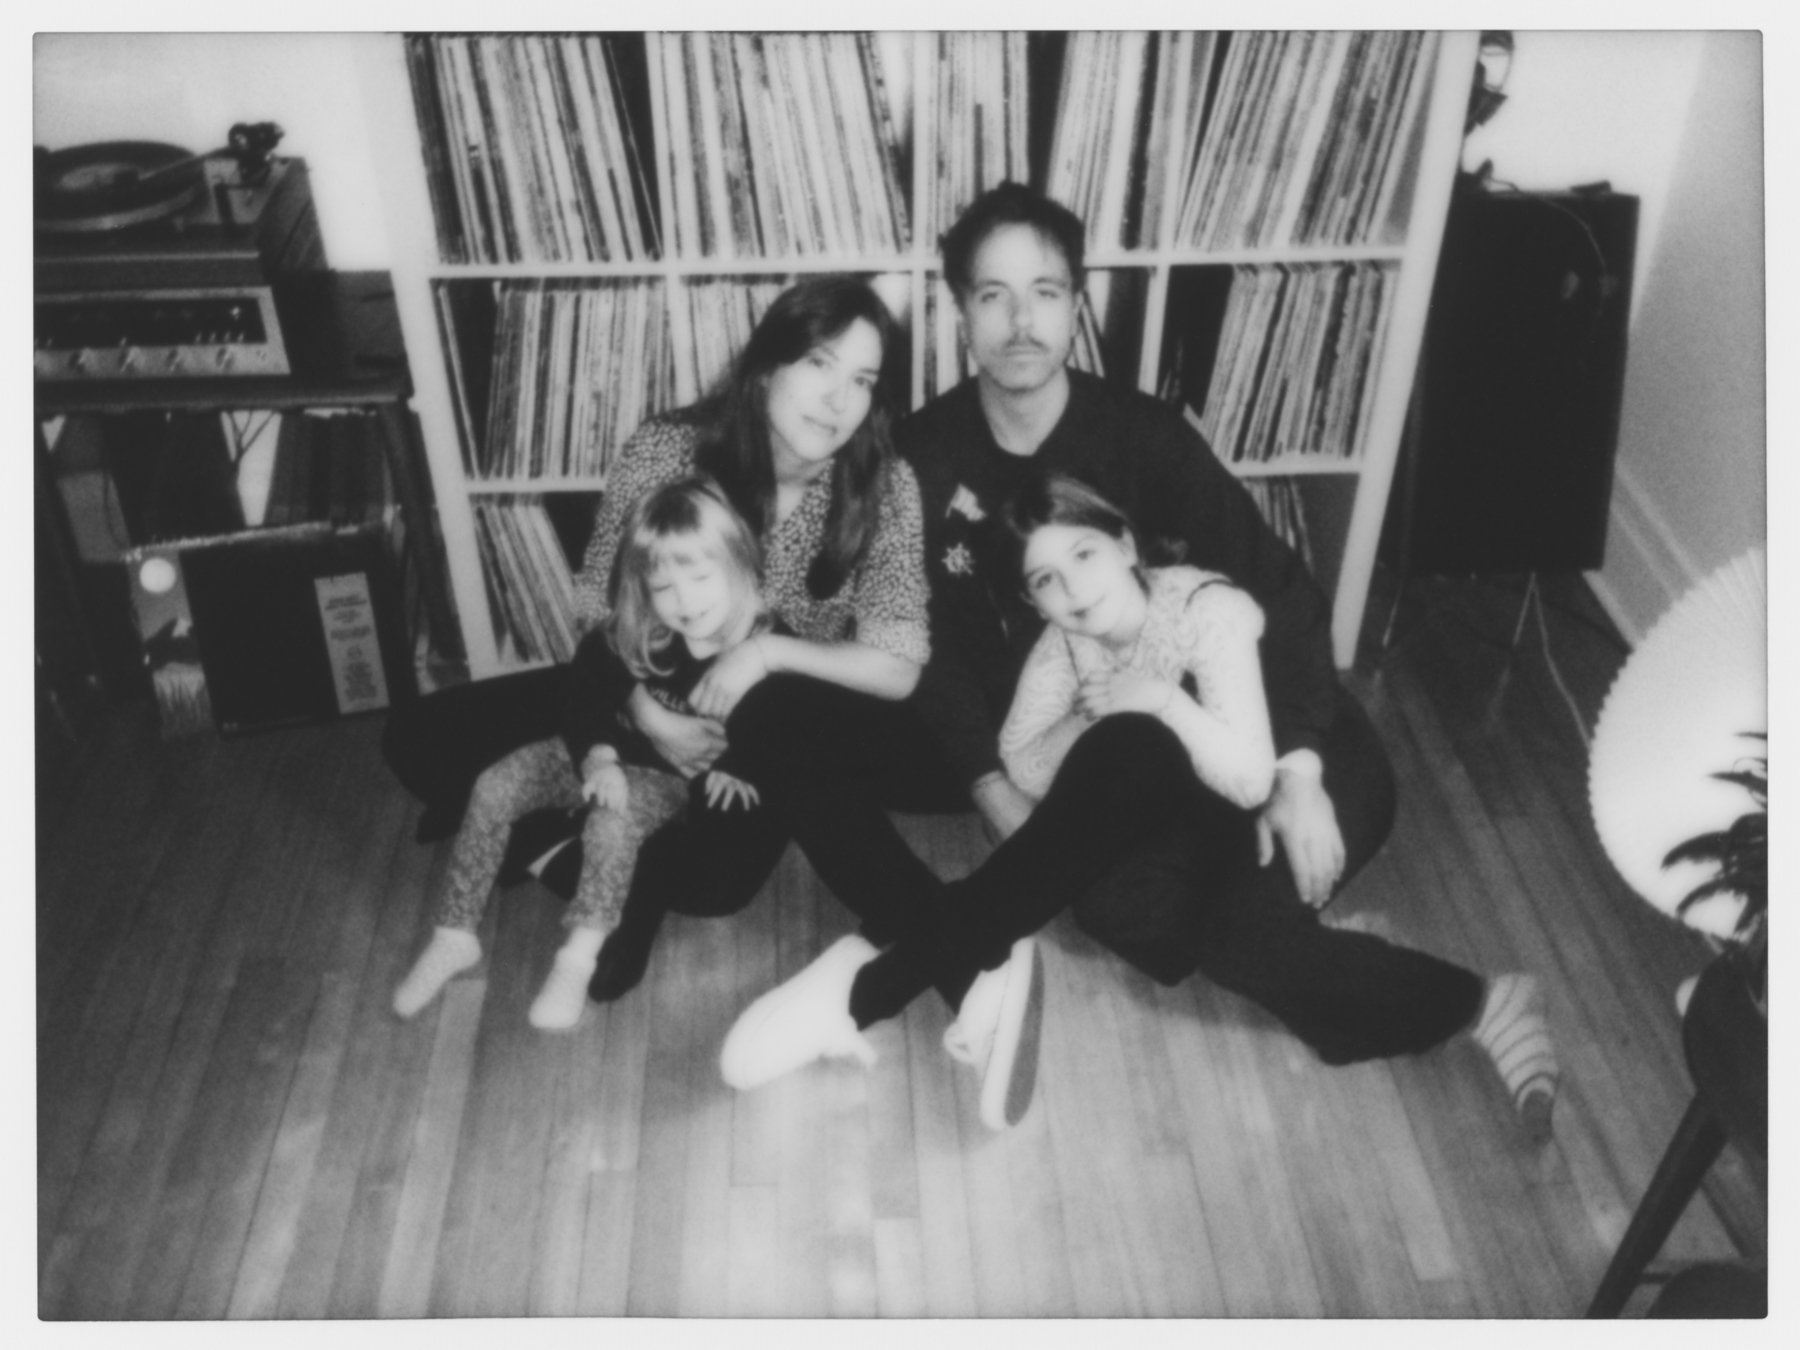 seance-photo-analogique-famille-photographe-film-et-super-8-a-montreal-marianne-charland-54.jpg (copie)